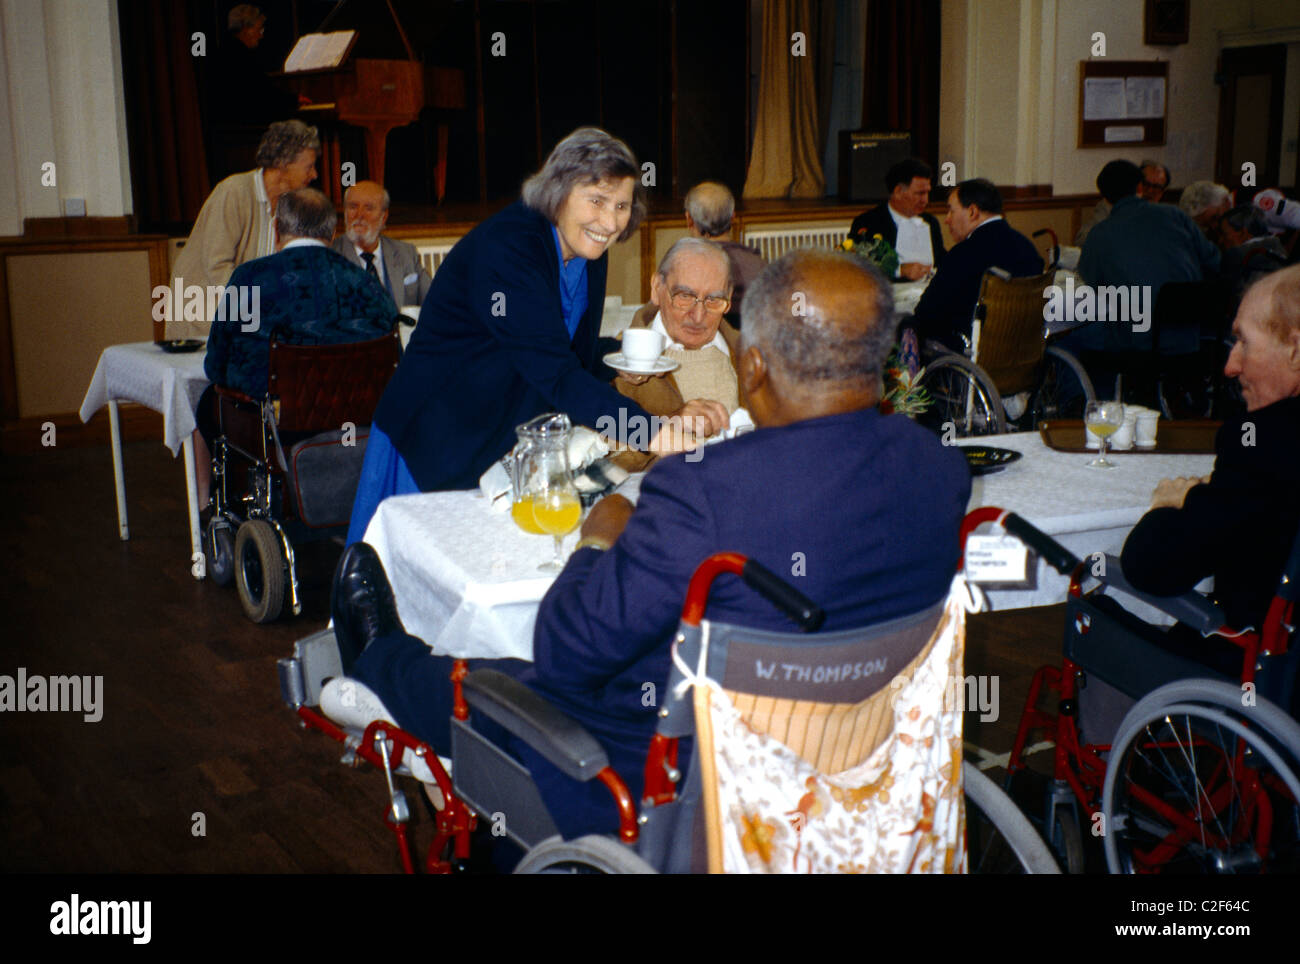 Lest We Forget Association Volunteer Workers Serving Lunch St Andrews Church Hall Stock Photo